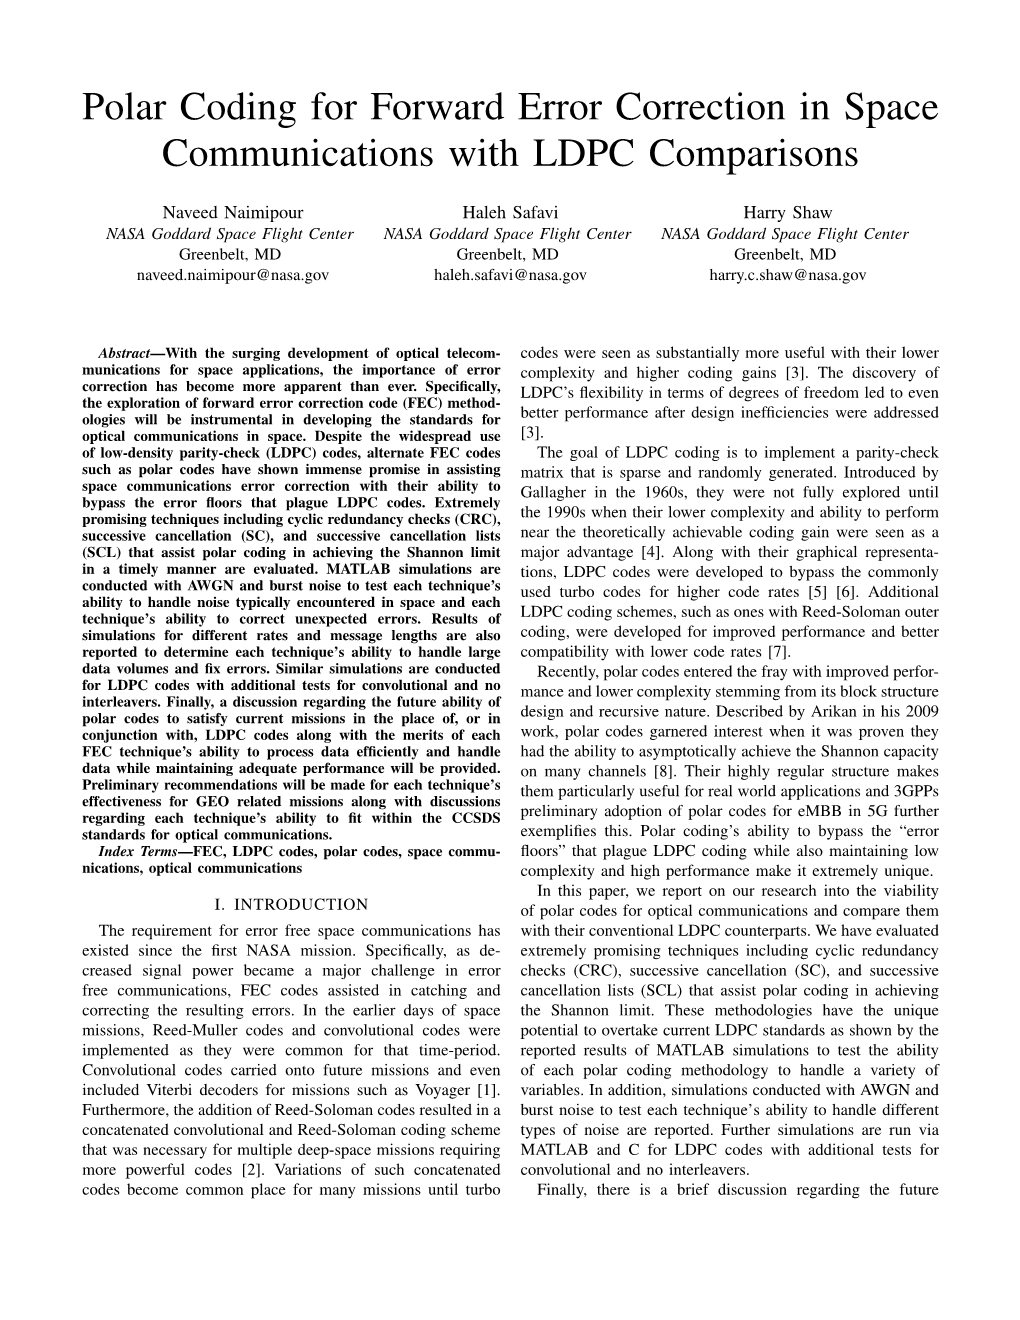 Polar Coding for Forward Error Correction in Space Communications with LDPC Comparisons